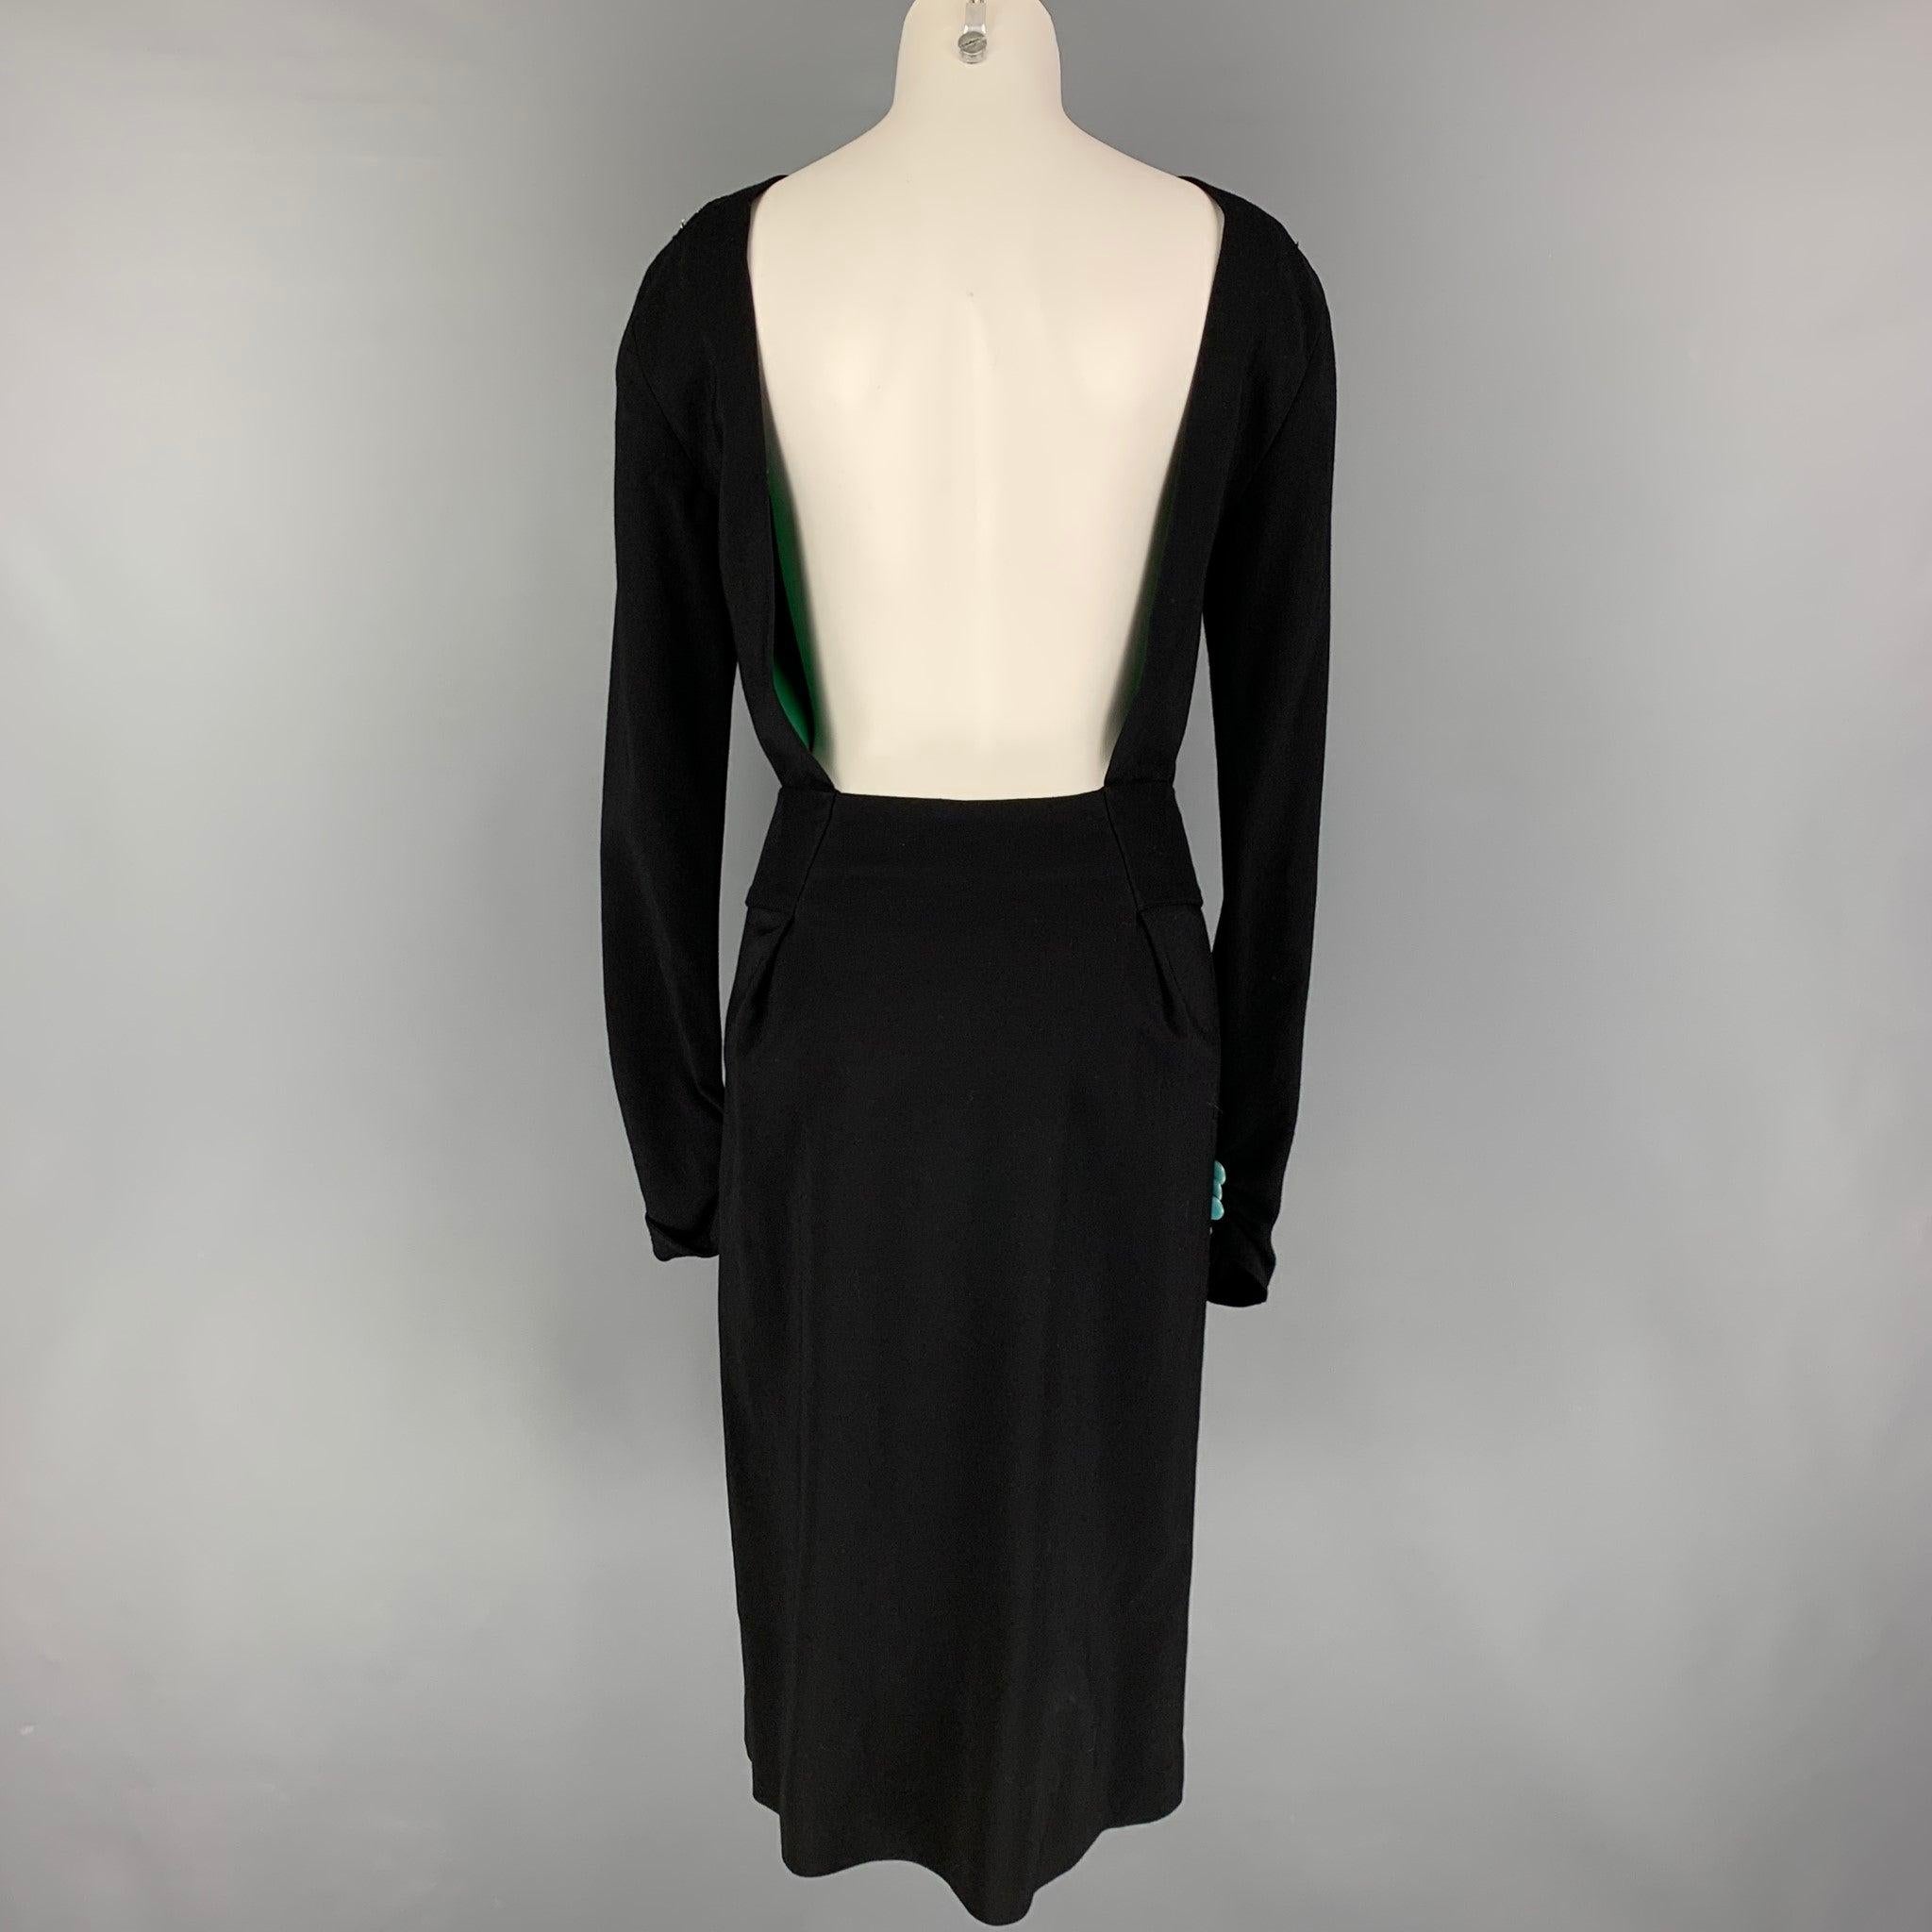 PAUL SMITH Size 4 Black Viscose Beaded Open Back Dress In Good Condition For Sale In San Francisco, CA